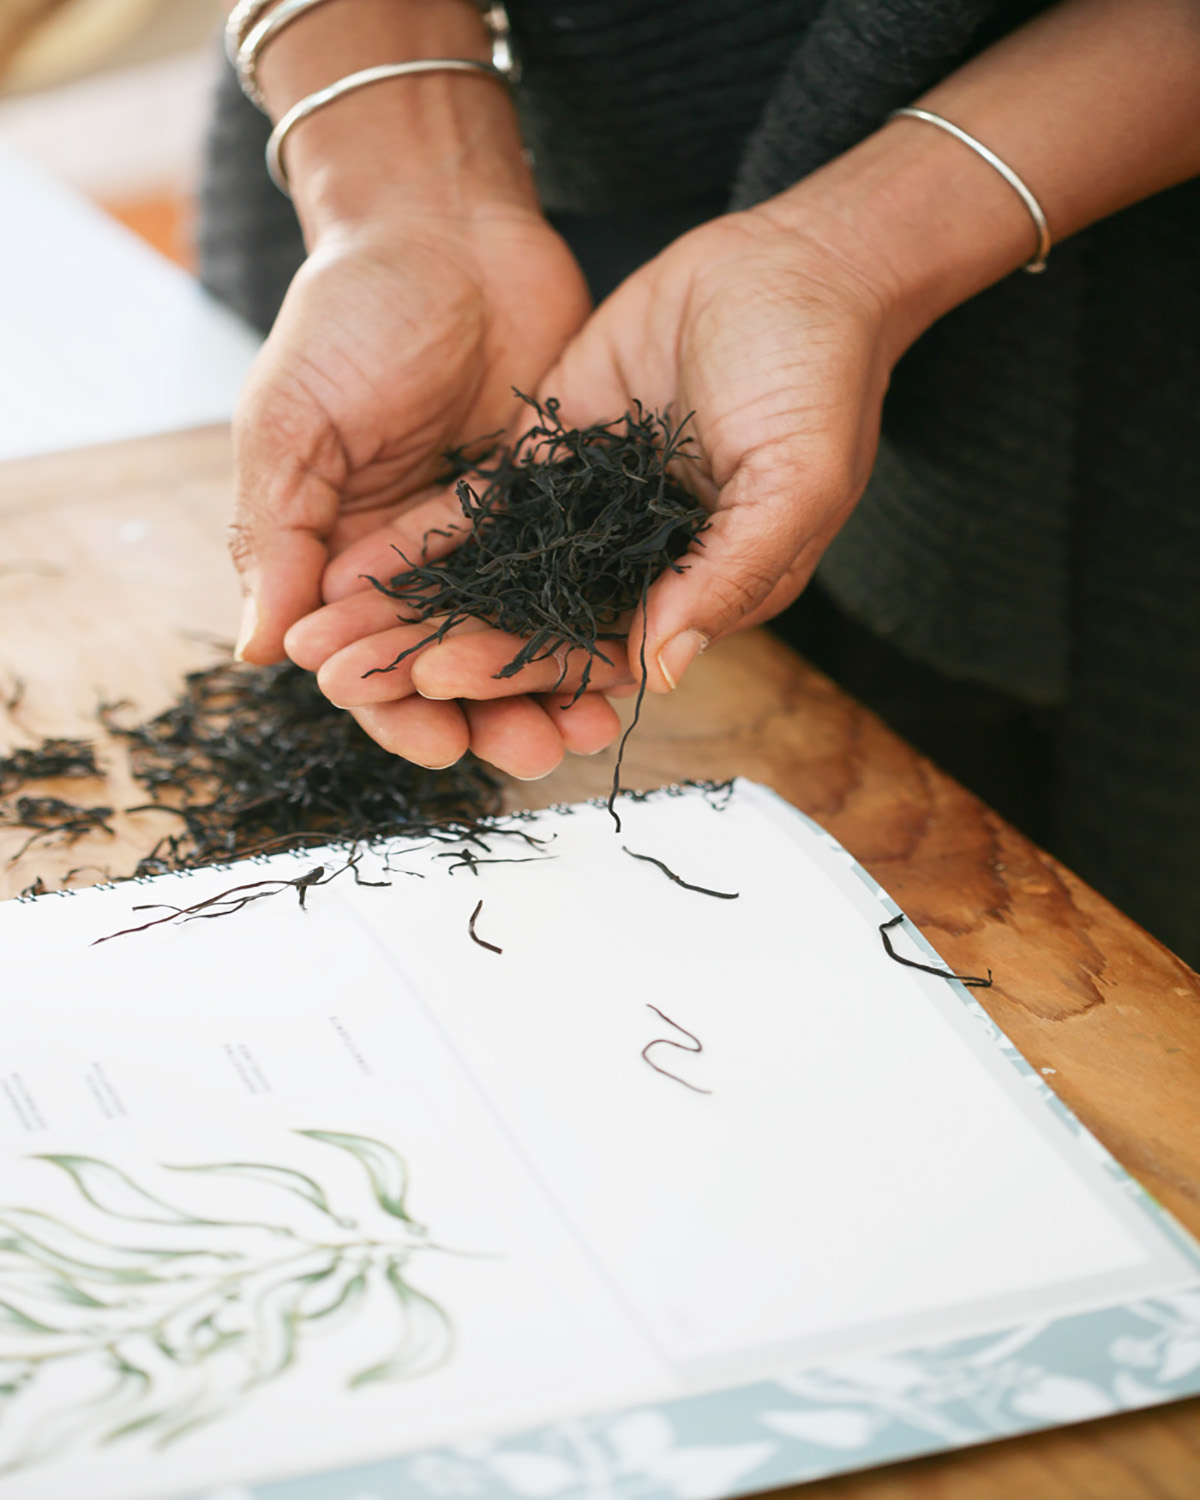 Seaweed 101: What You Need To Know | Herbal Academy | Seaweed can be a nutritive, wellness-promoting, and tasty addition to your herbal formulas, diet, and self-care routine! Read on to learn more!